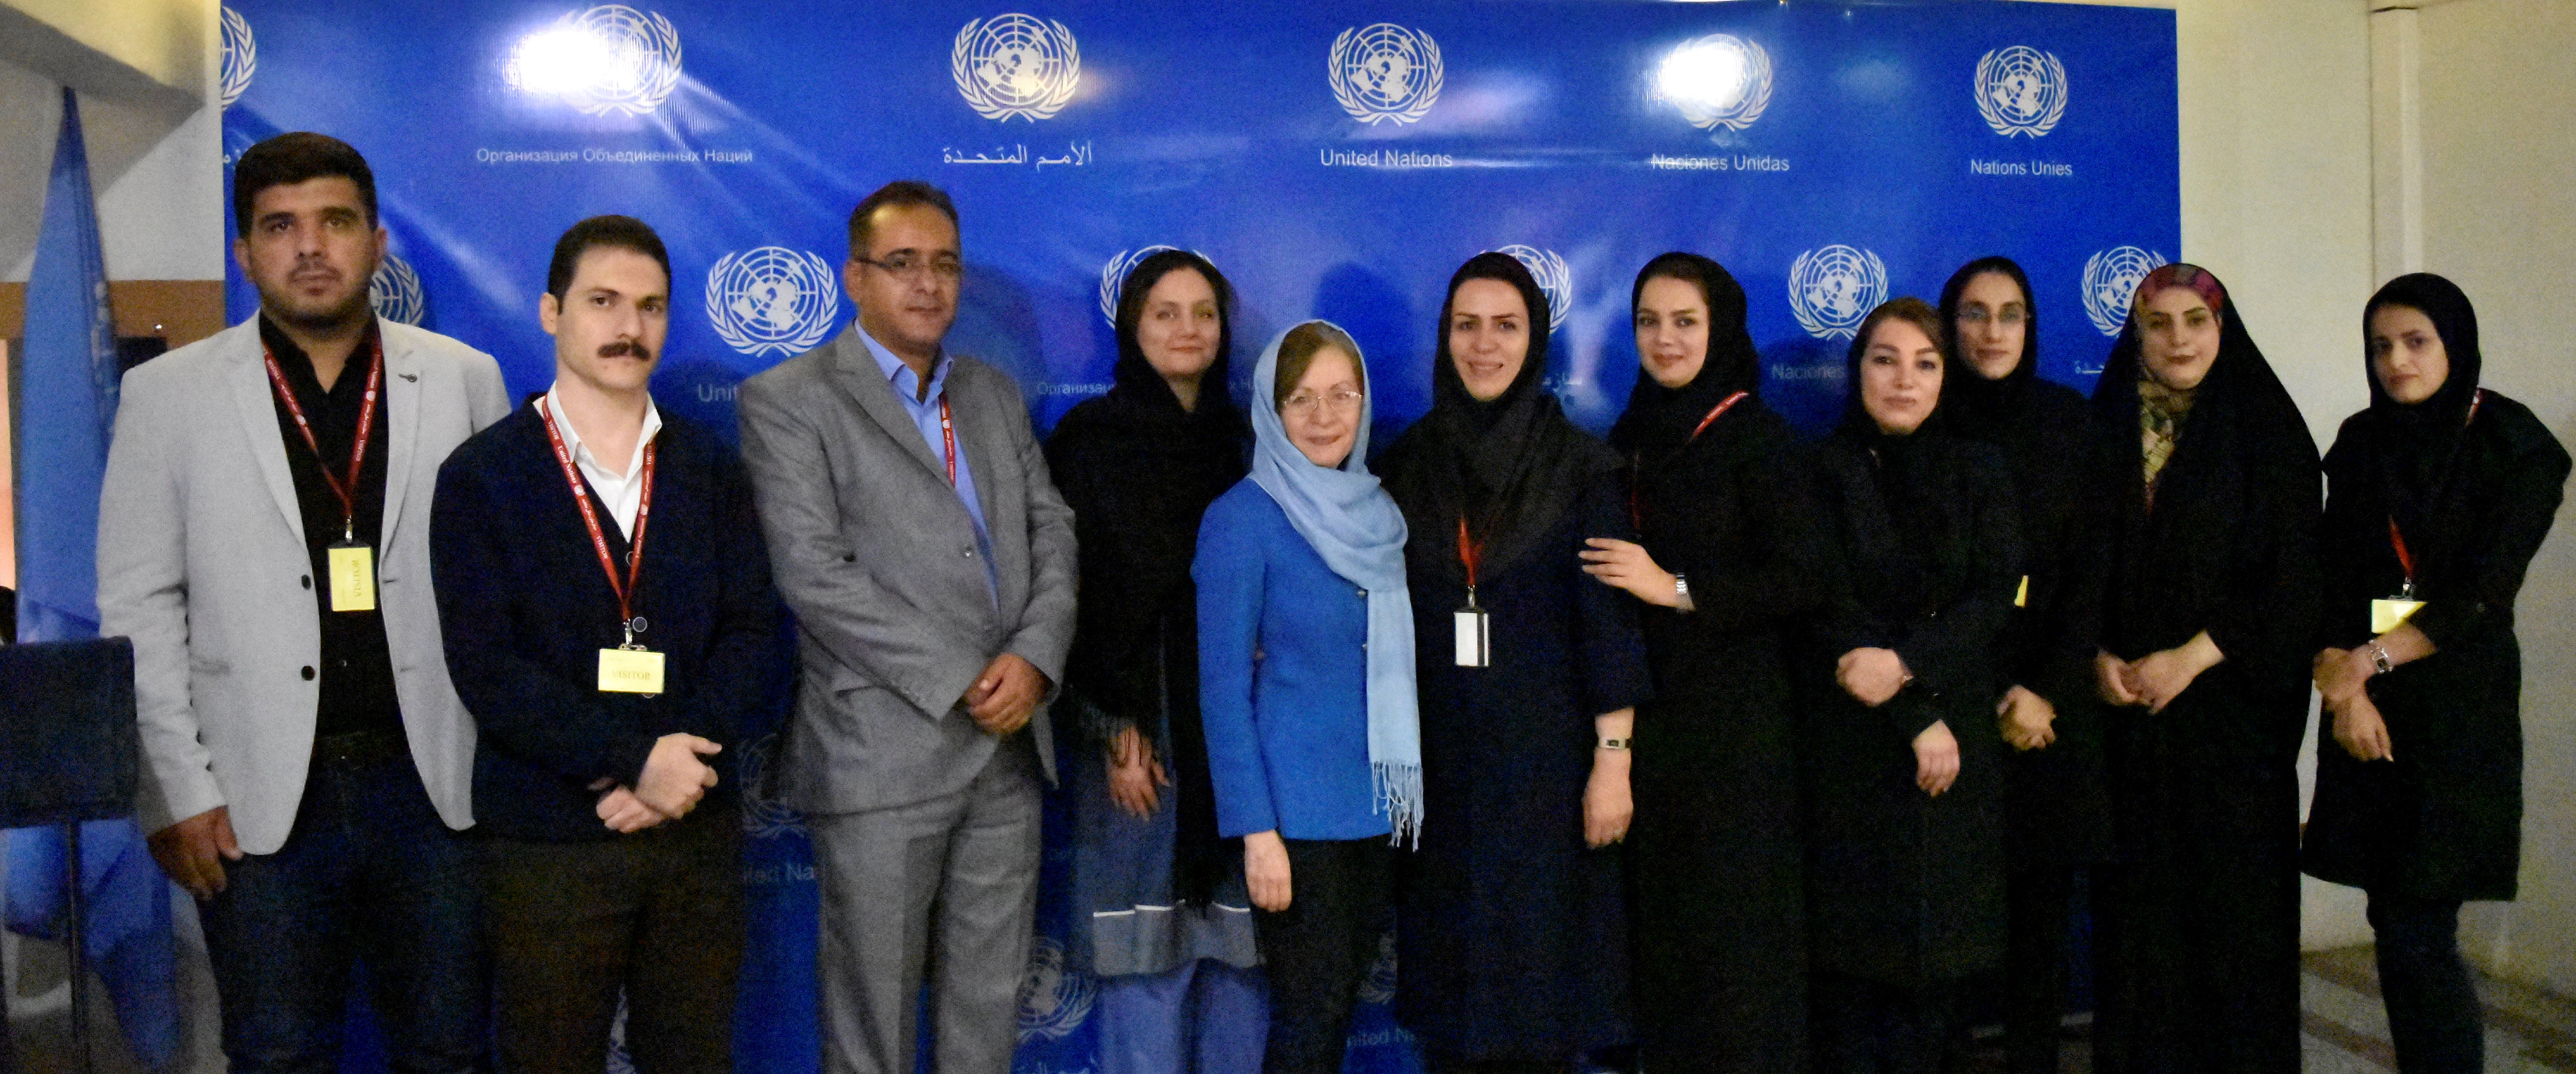 workshop-for-graduate-students-of-iau-kermanshah-branch-on-the-occasion-of-the-un-day